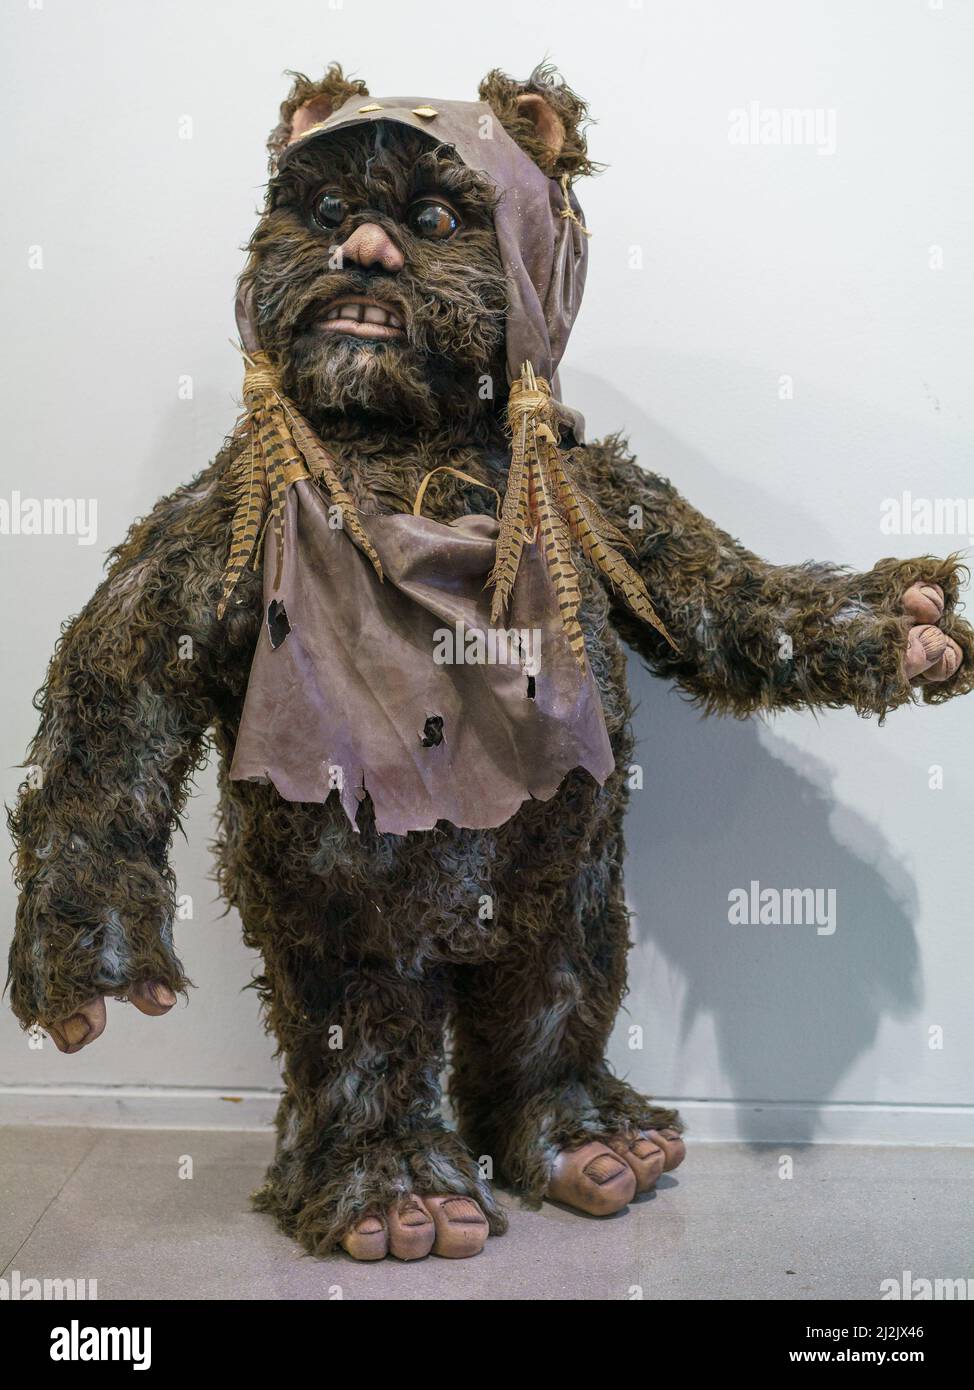 A figure of the character Ewok is exhibited during the exhibition of 'the Star Wars universe' by the sculptor Juan Villa at the Paco de Lucía exhibition hall in Madrid. The Star Wars universe can be visited for free until April 28 at the Paco de Lucía exhibition hall. The exhibited pieces are part of the work that this master craftsman is developing with his team for the future permanent exhibition Puerto Espacio, a science fiction project of his own. (Photo by Atilano Garcia / SOPA Images/Sipa USA) Stock Photo